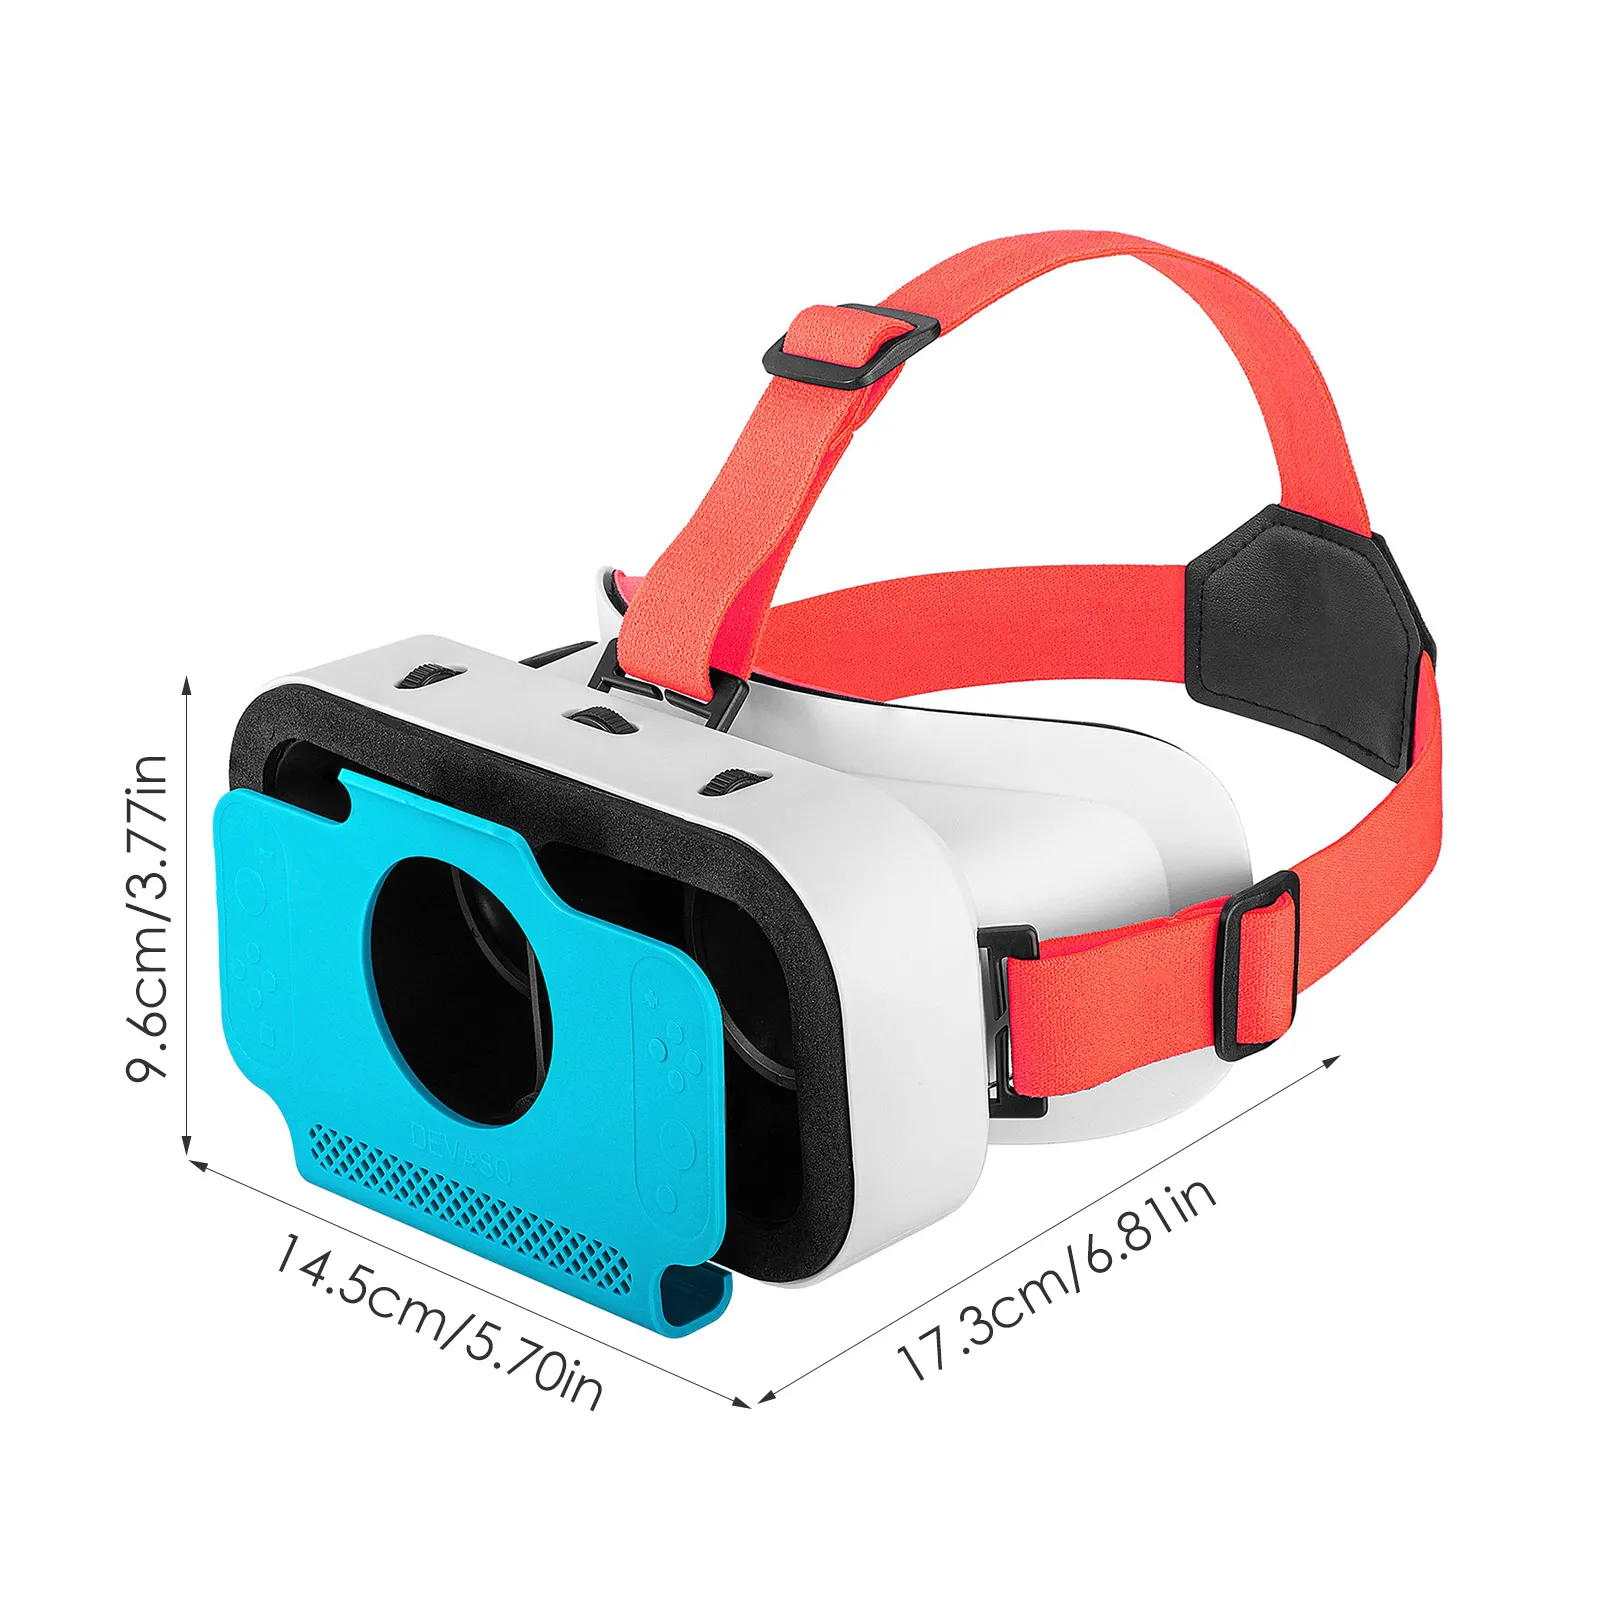 

VR Virtual Reality Glasses For Switch OLED Model For Kids Adults - Ergonomic 3D Glasses Headset Helmets With Adjustable Lens